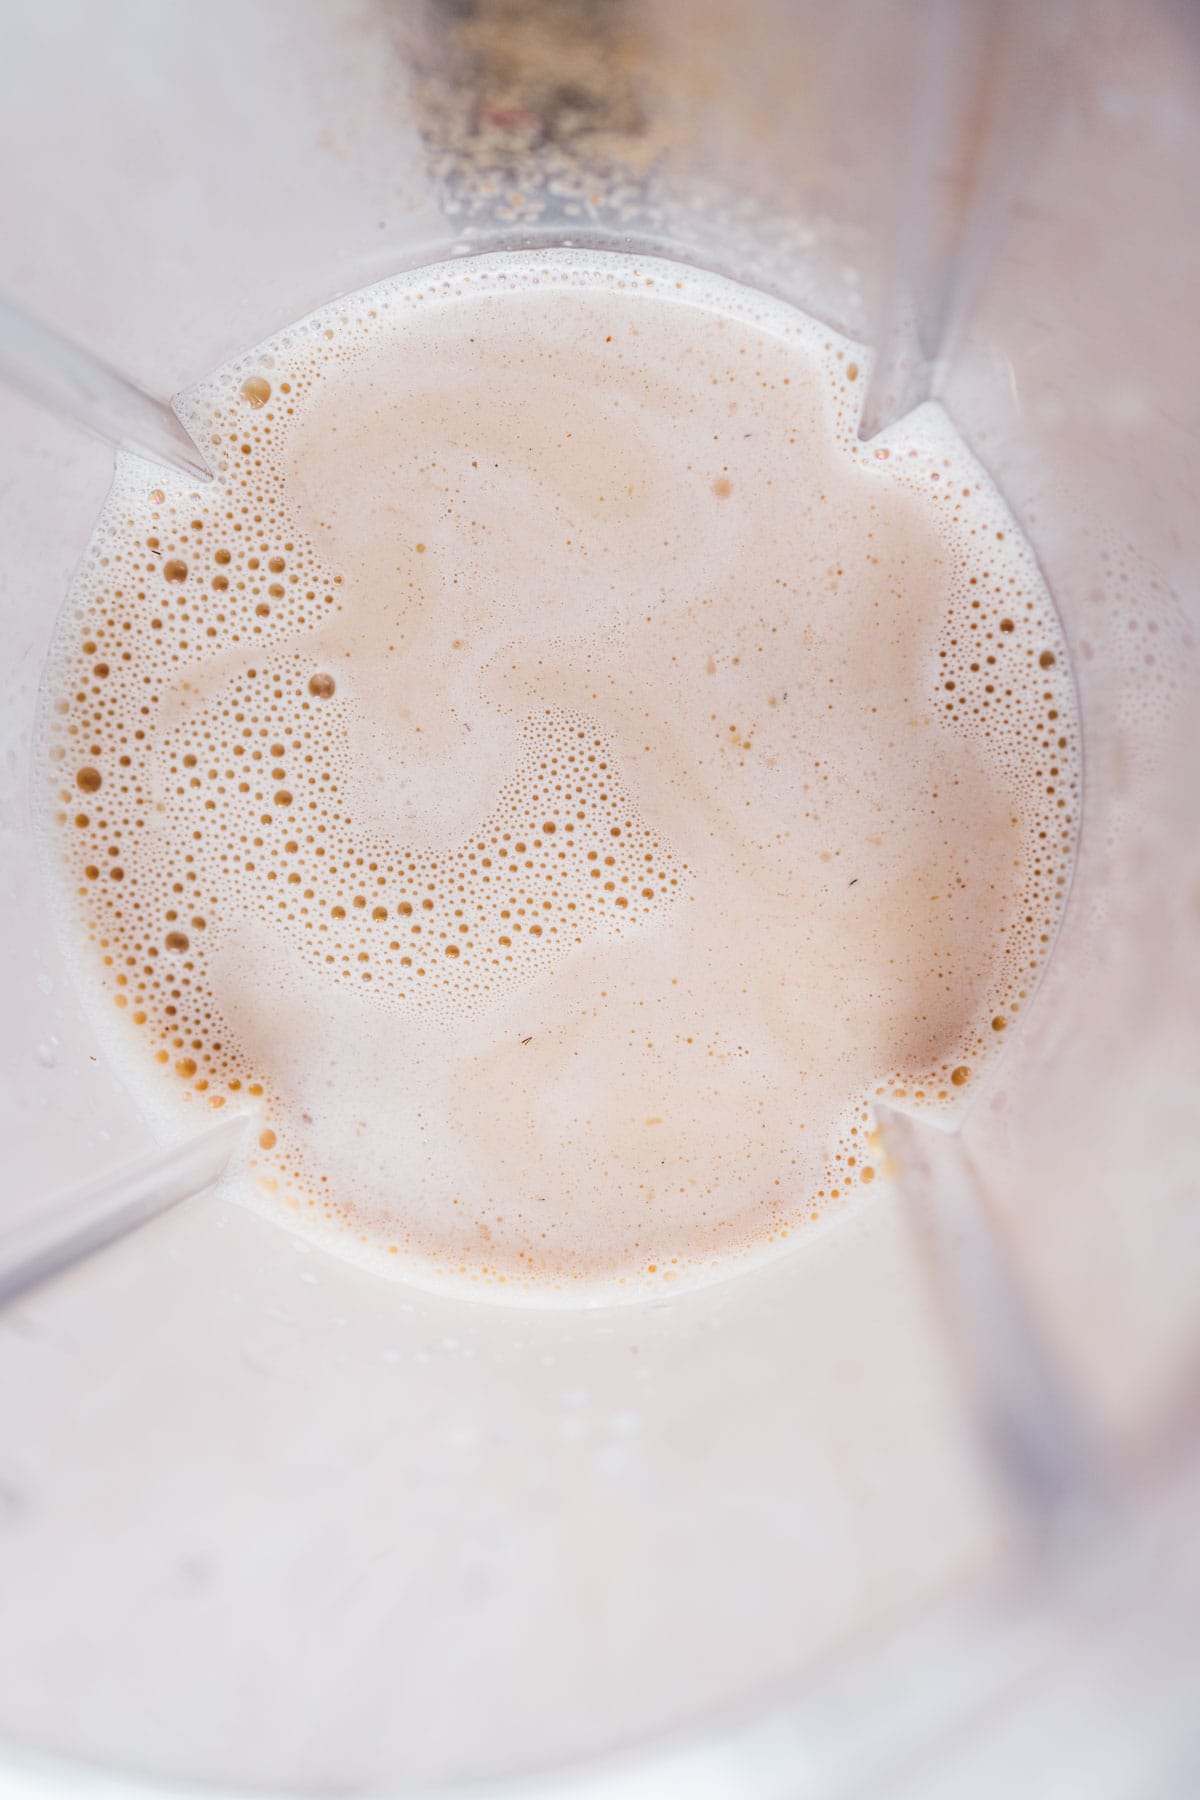 Top view of a blender container filled with milk.